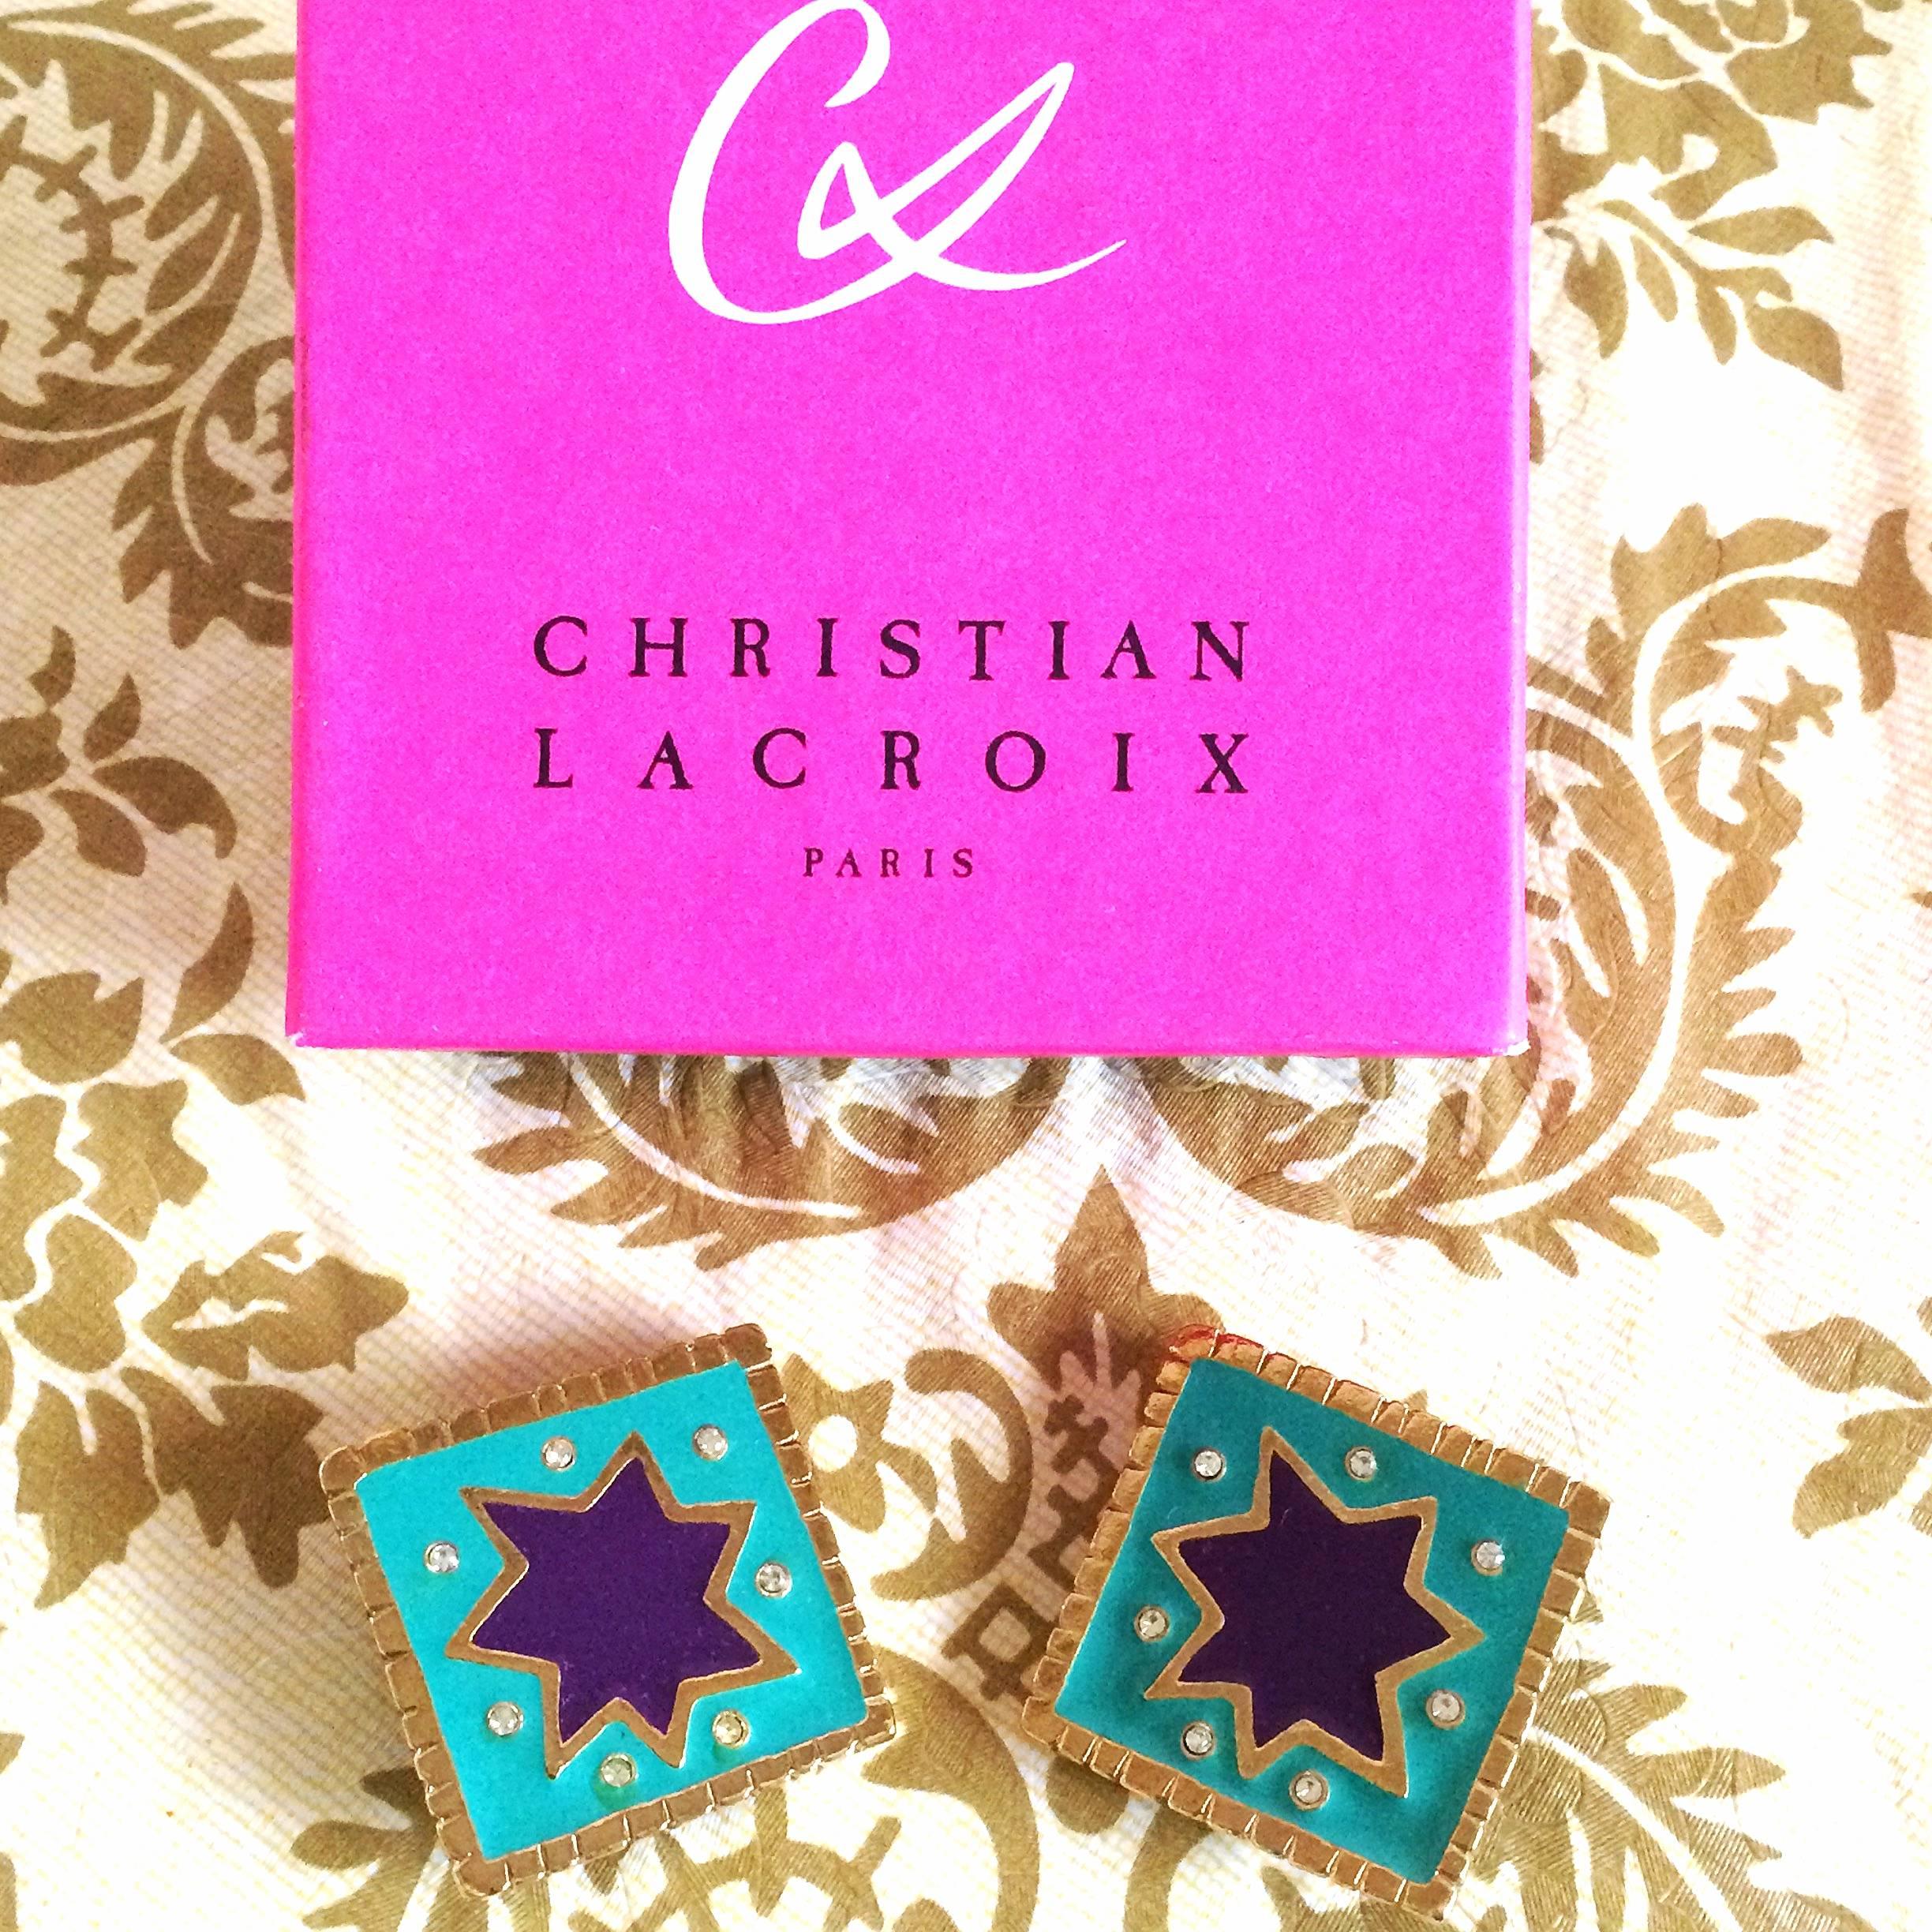 Vintage Christian Lacroix blue and purple enamel extra large square earrings with crystals. Rare statement jewelry. Great gift.

Introducing a 90's vintage Christian Lacroix blue and purple enamel coated golden earrings in square shape. Blue star